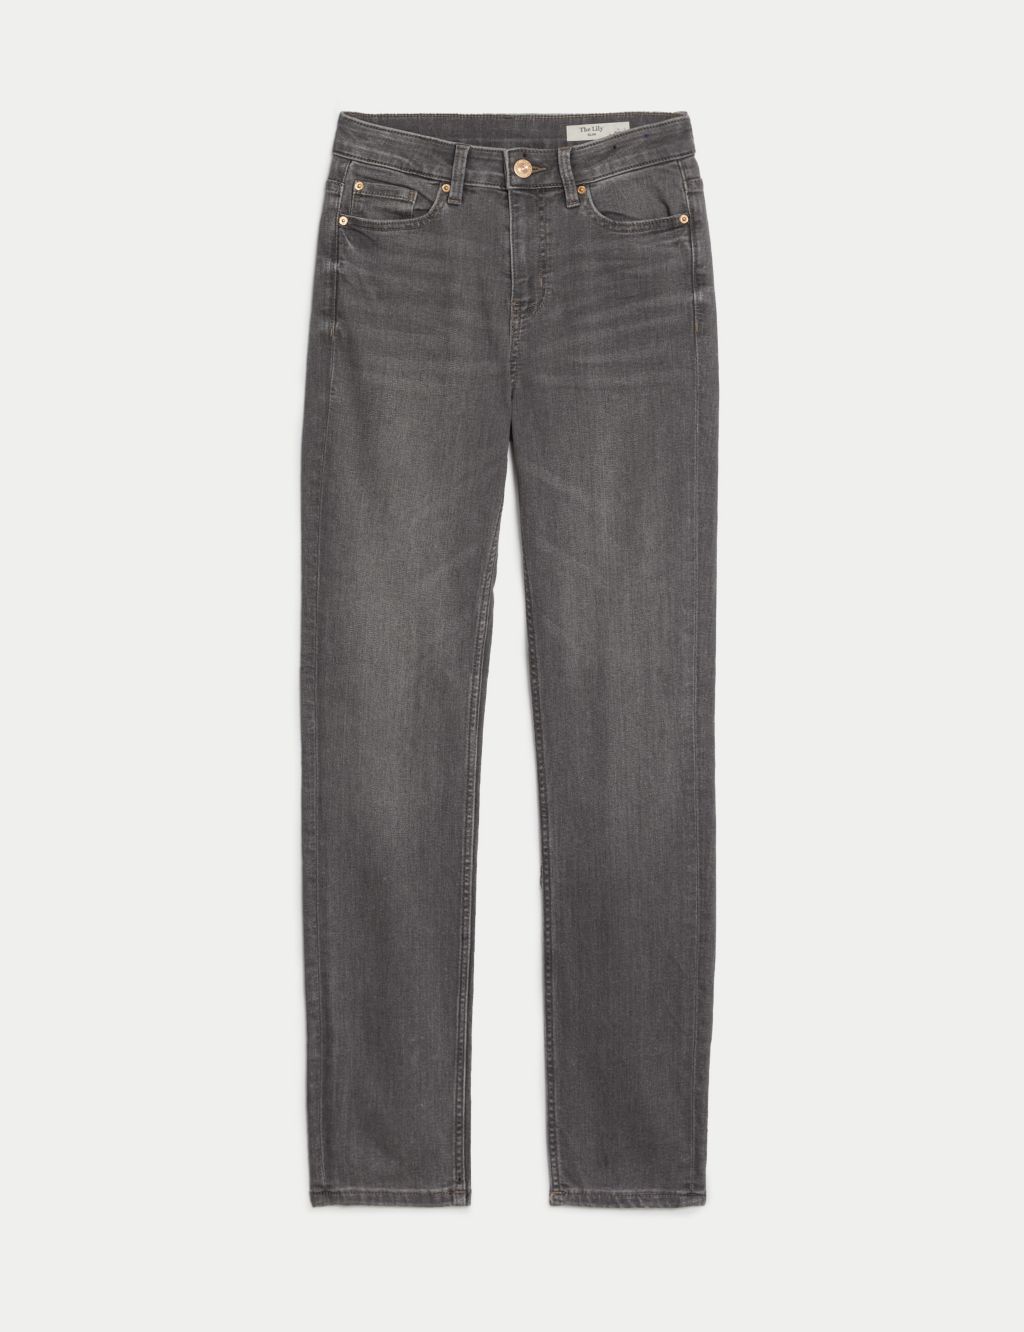 Lily Slim Fit Jeans with Stretch 1 of 6